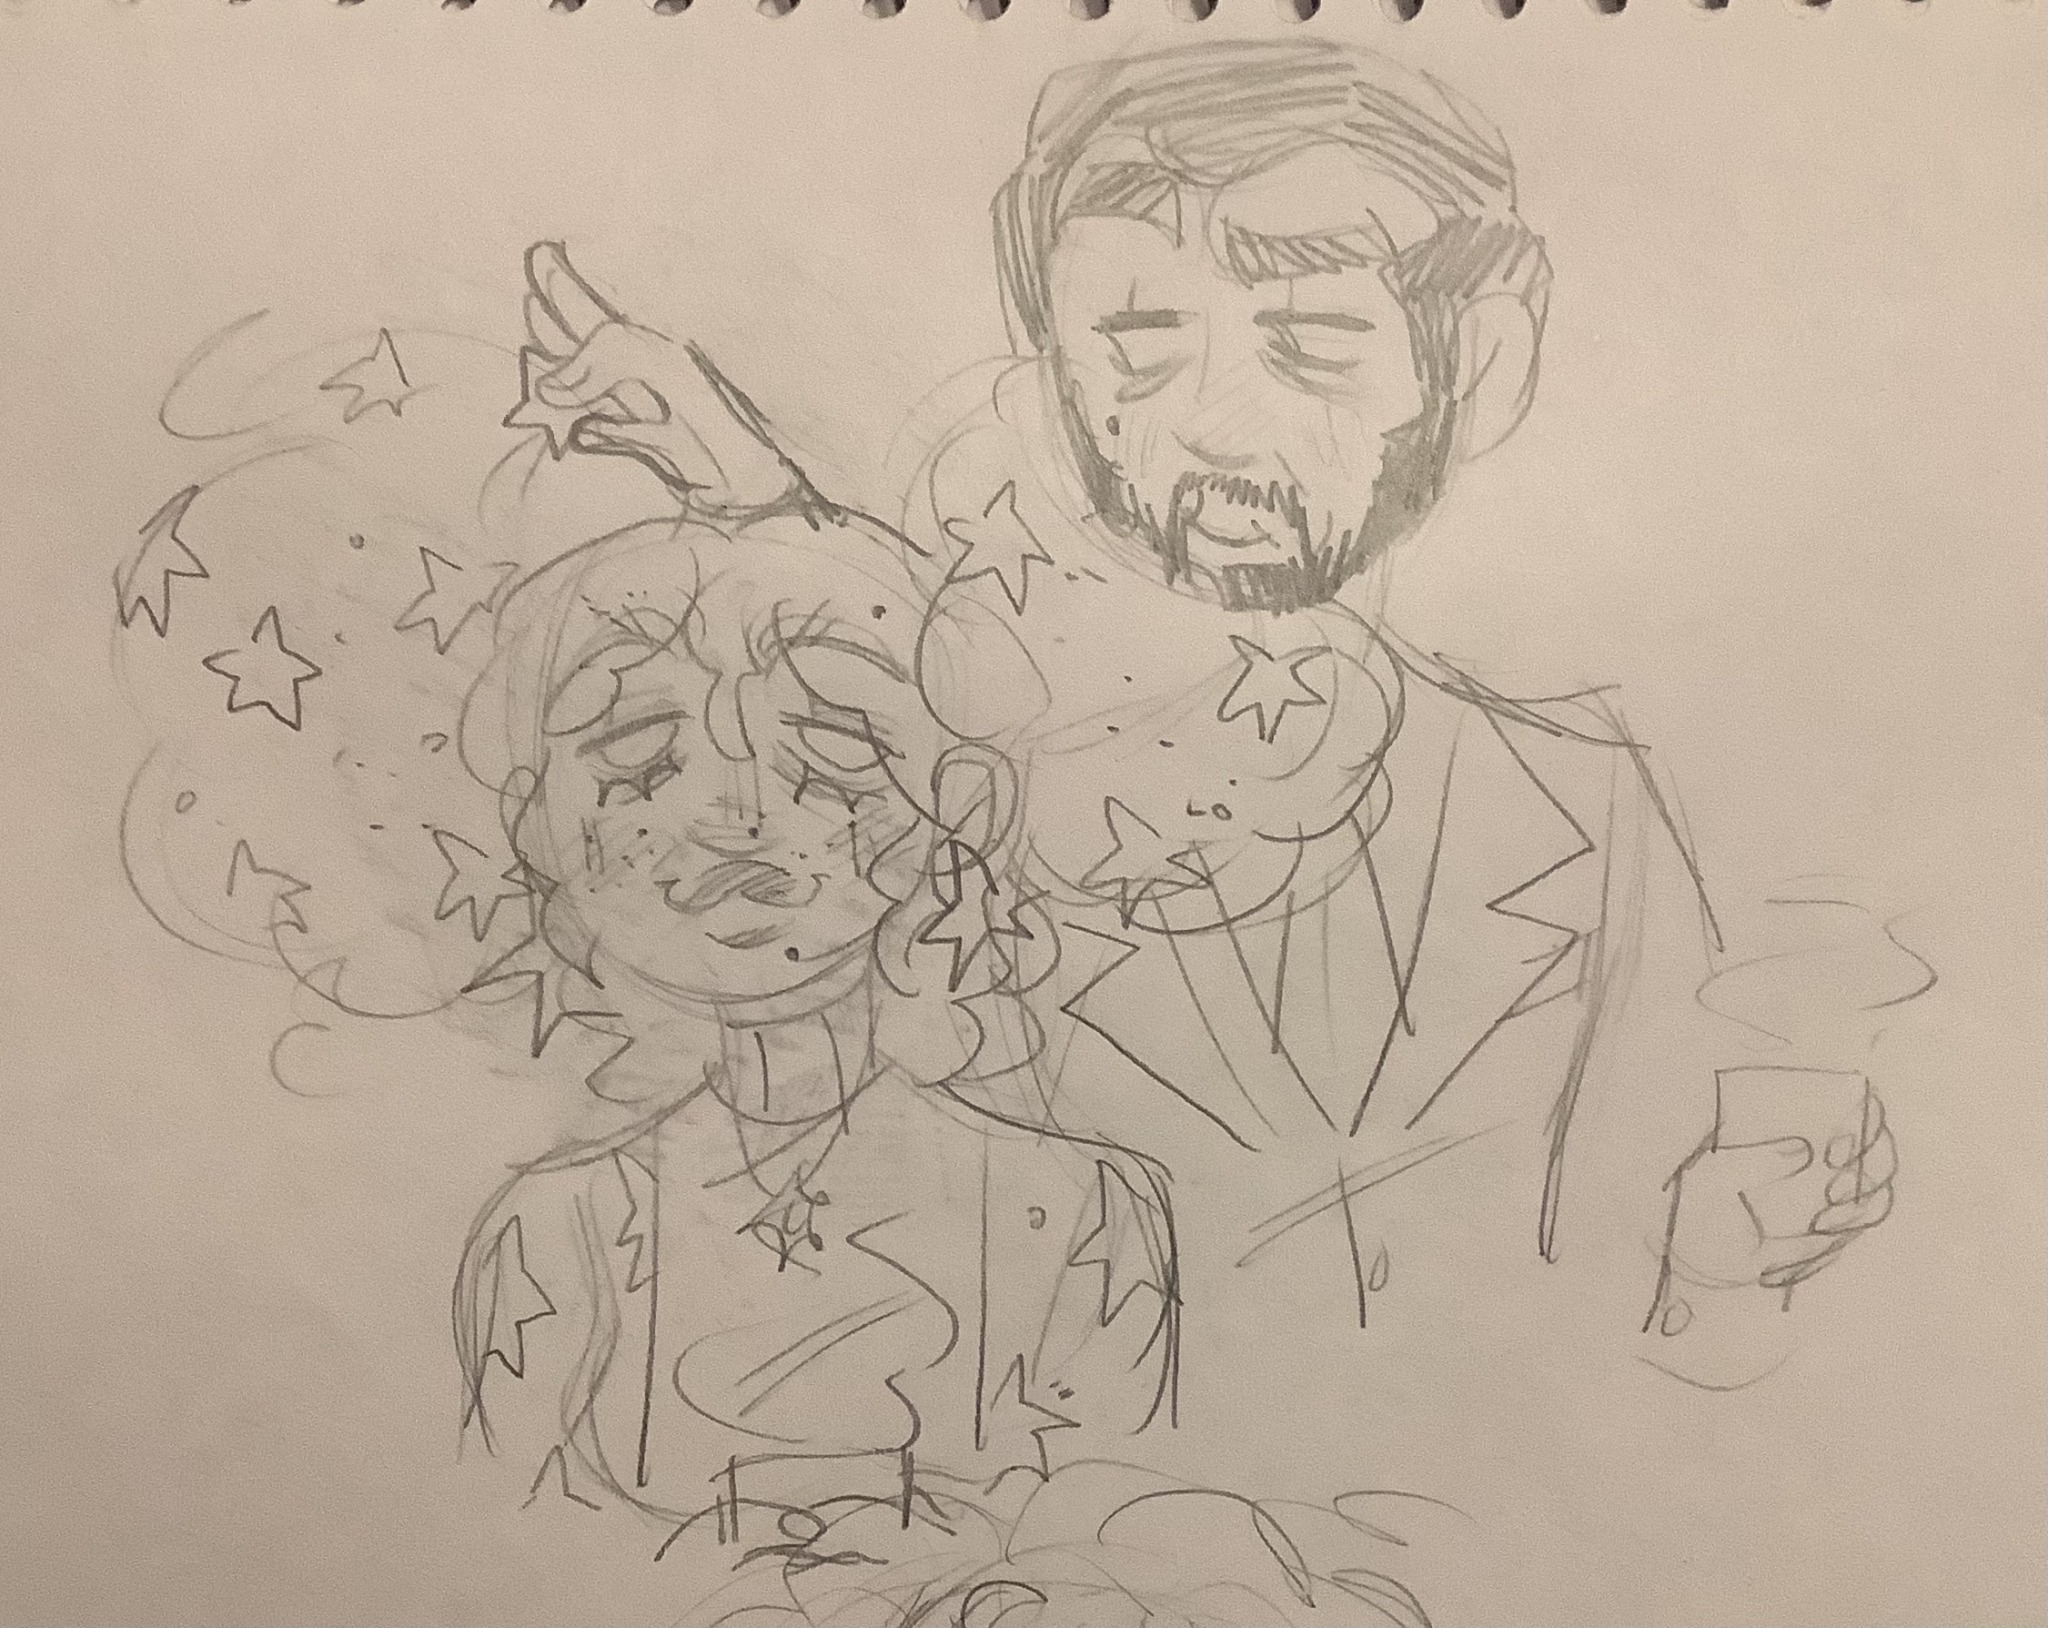 Martin GreyWhinder messes with Mari's Afro puffs (Harmony and Horror)